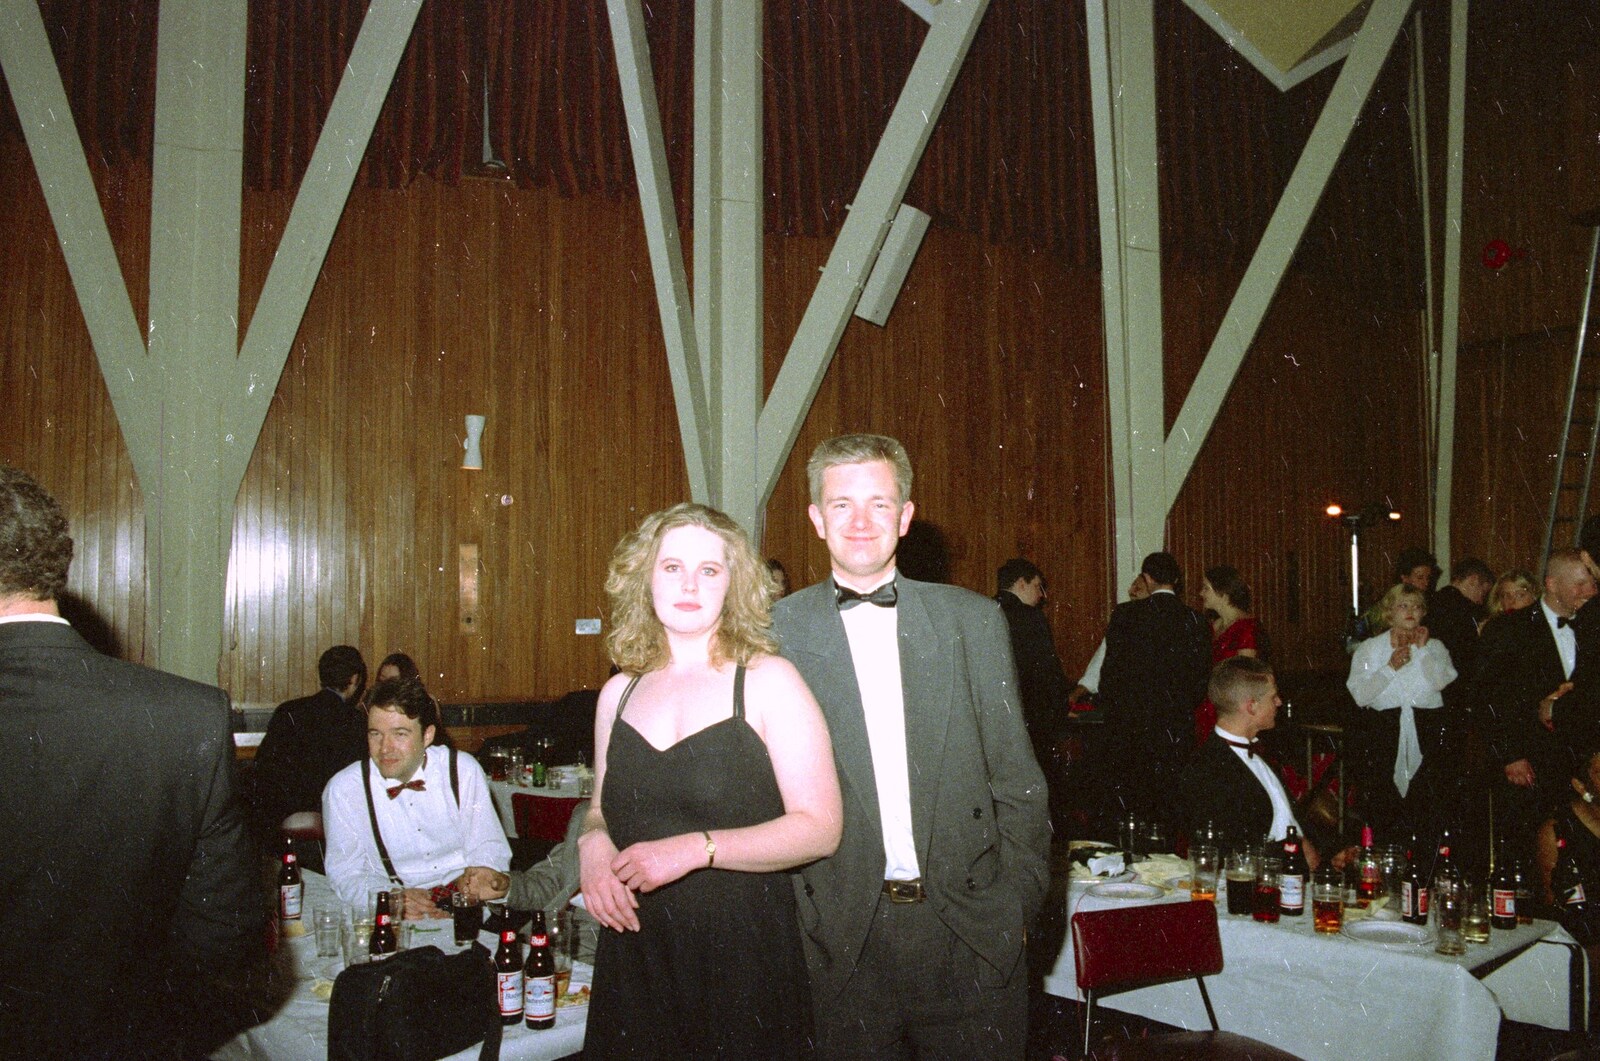 Nosher and some girl from CISU at the Suffolk College May Ball, Ipswich, Suffolk - 11th May 1997